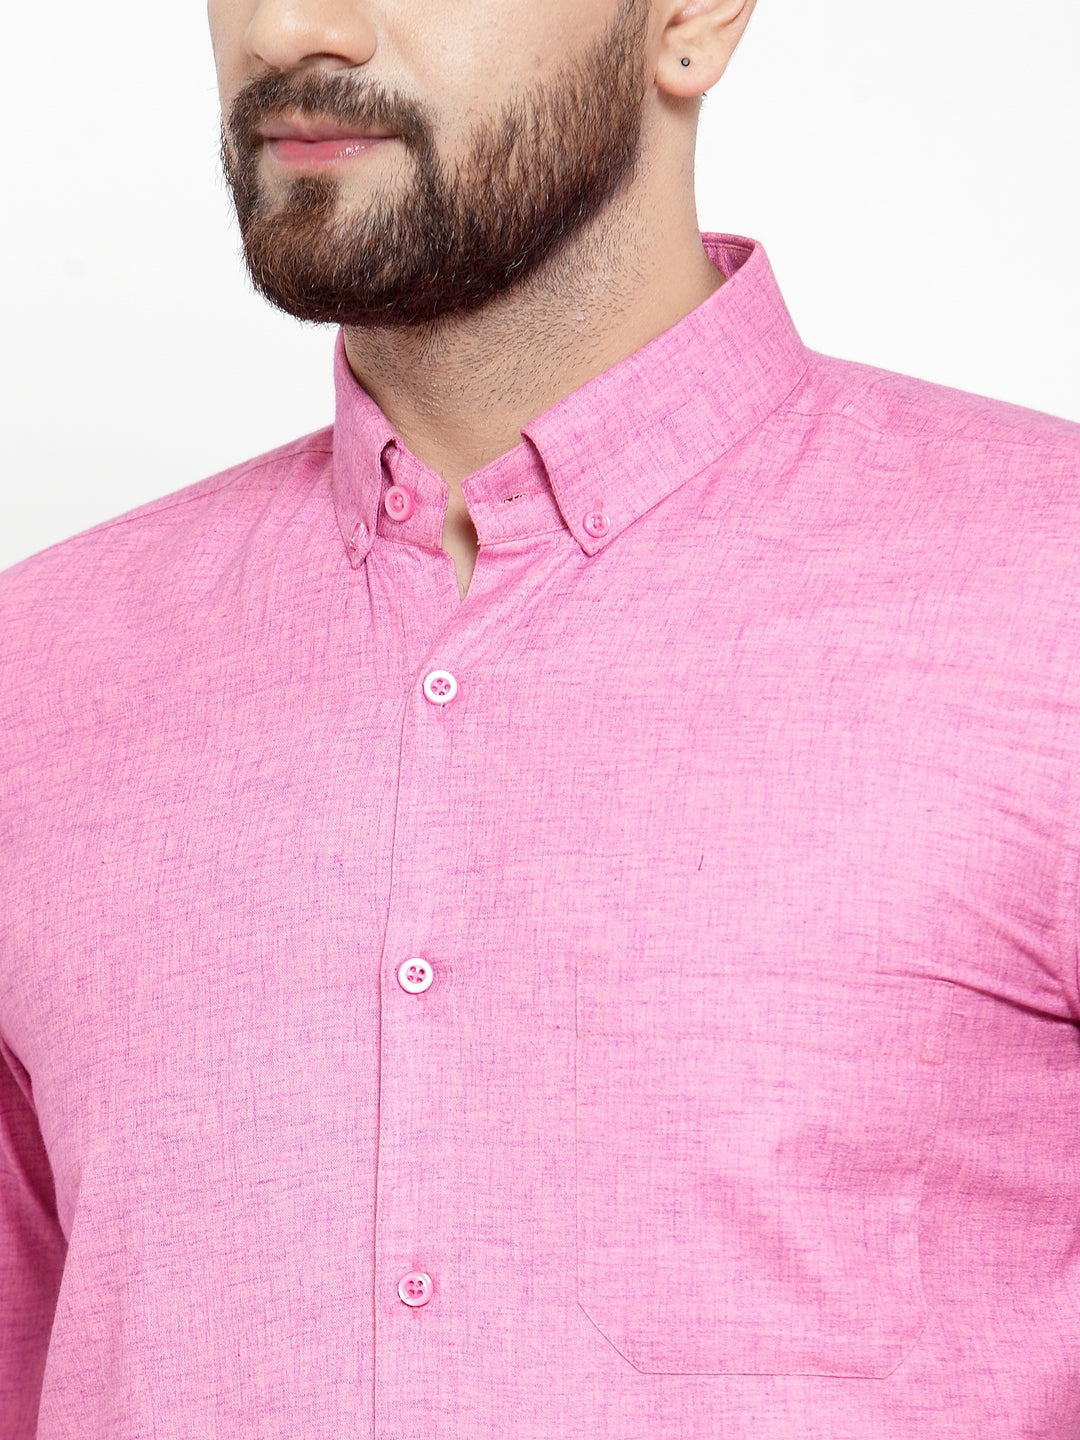 Men's Pink Cotton Solid Button Down Formal Shirts ( SF 753Pink ) - Jainish